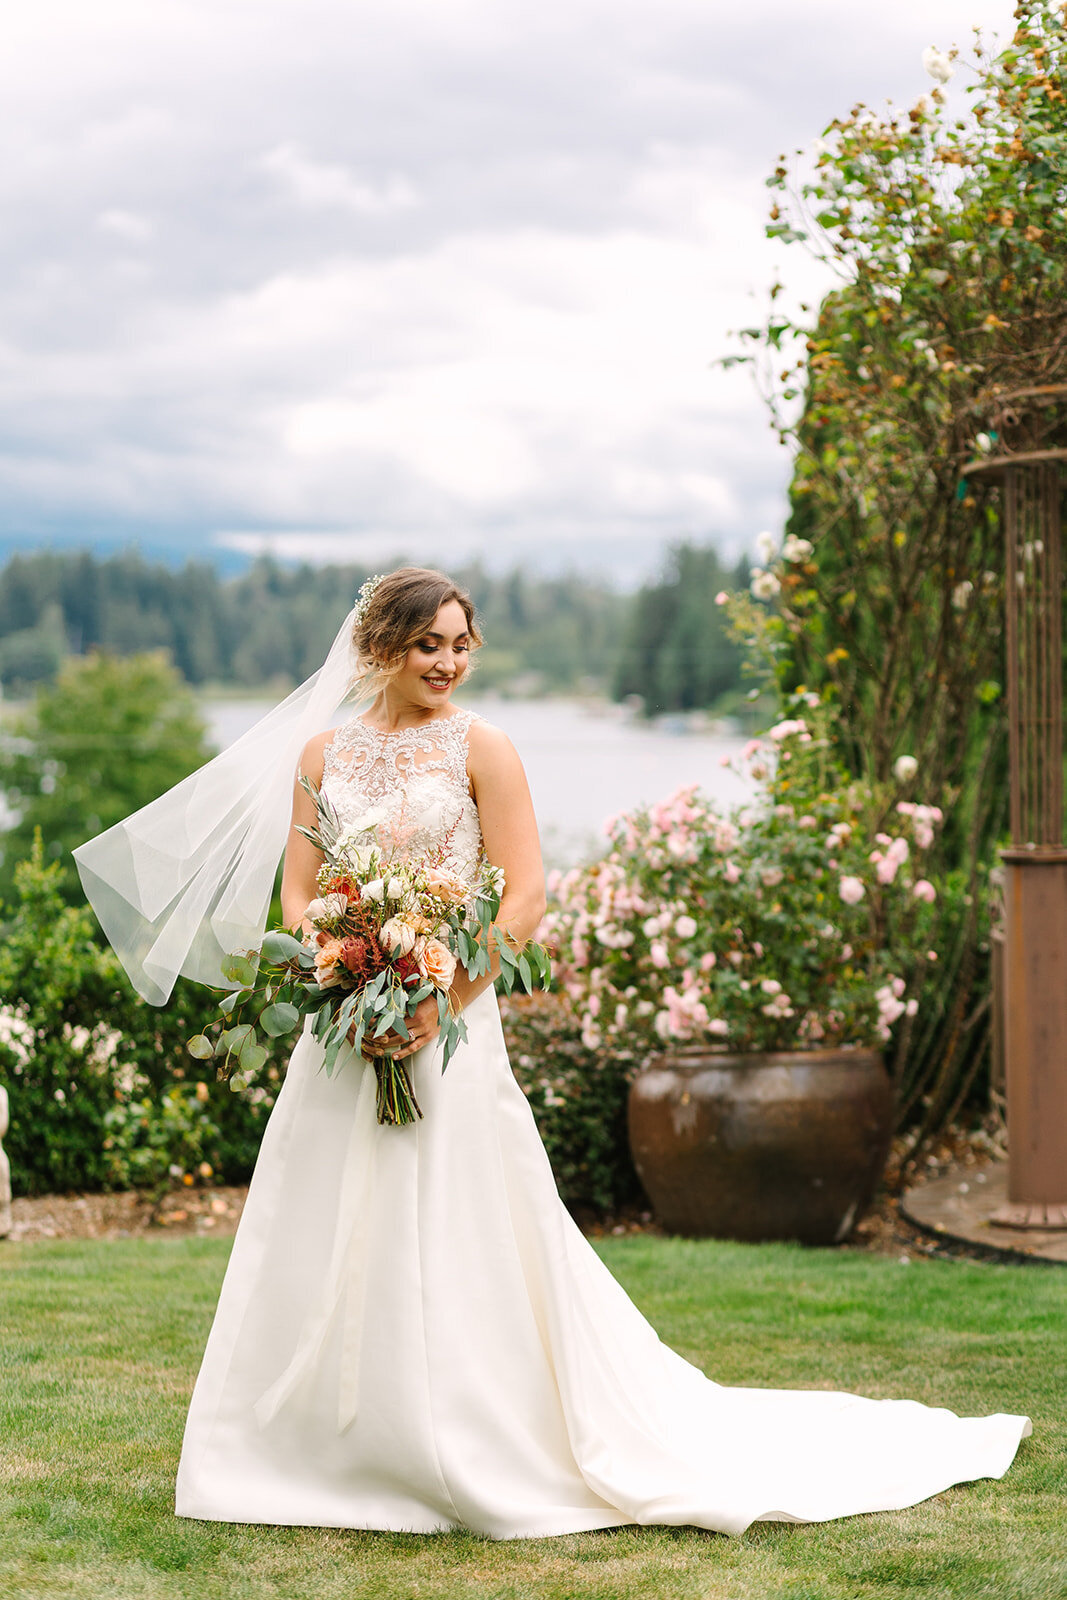 Portraits of the bride by Joanna Monger Photography Snohomish Photographers Green Gates at Flowing Lake